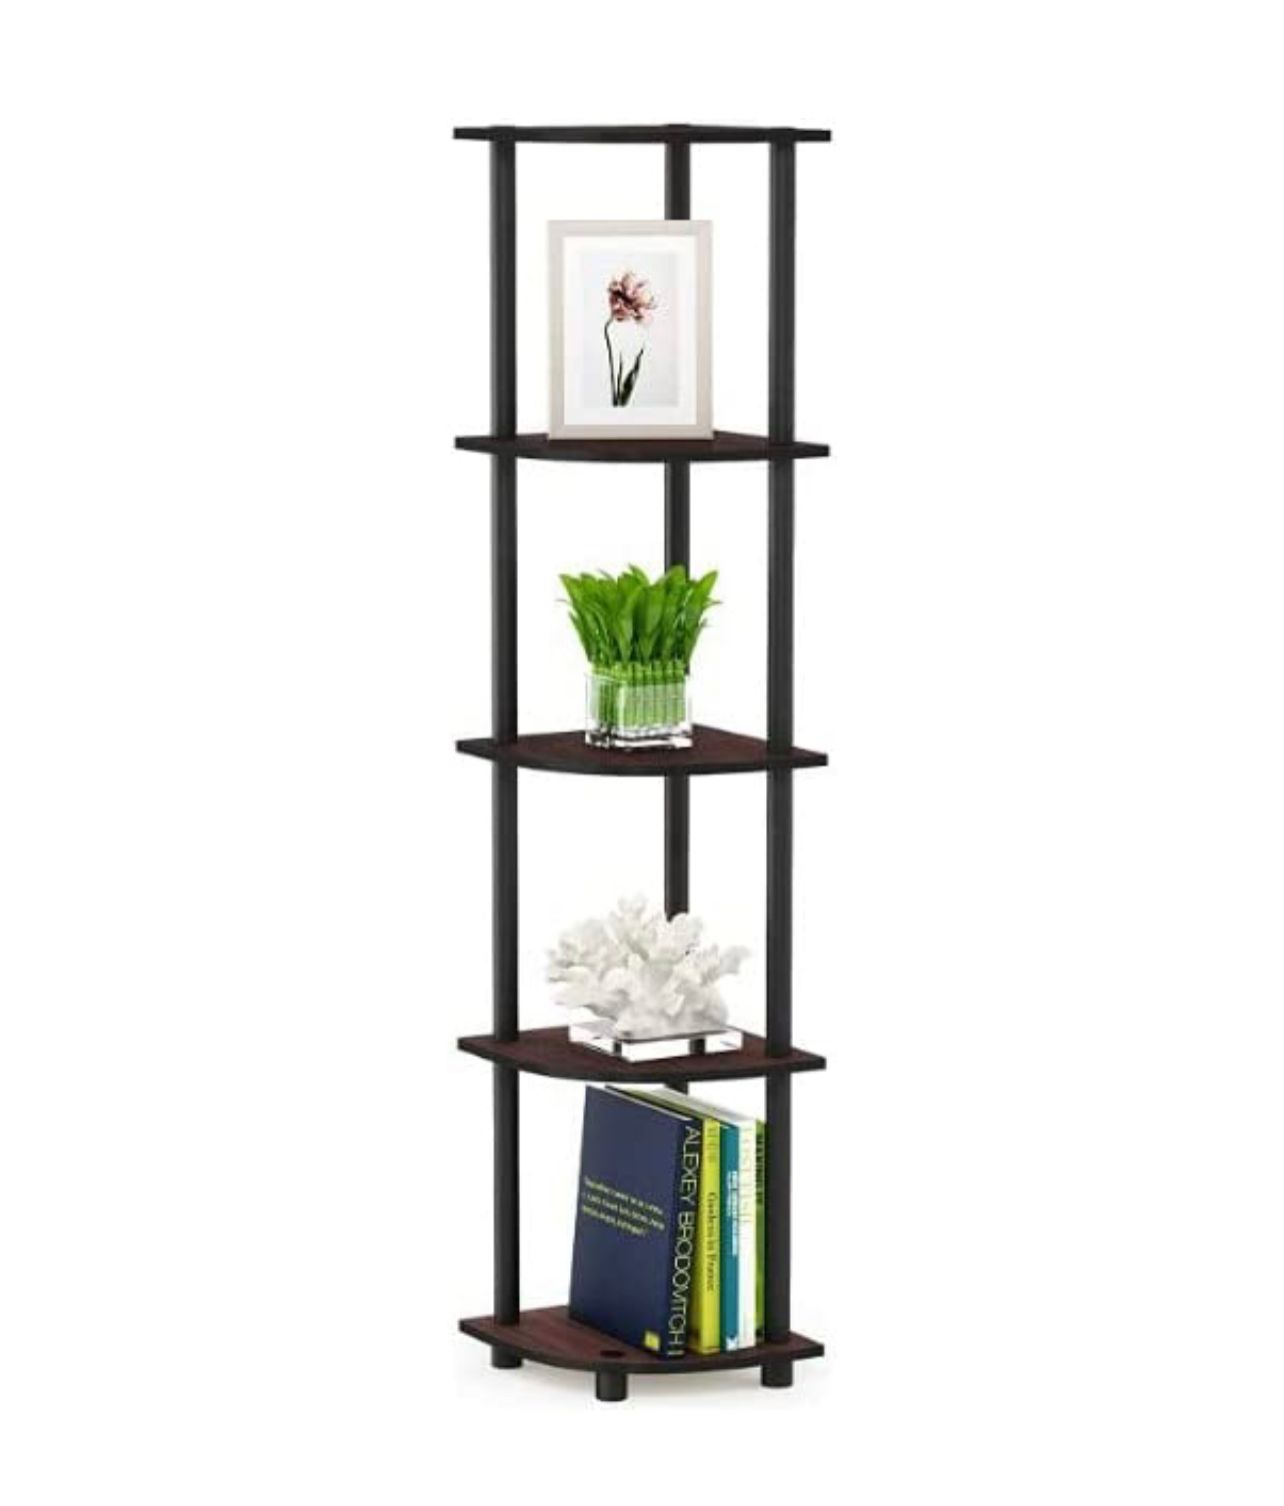 MALBRO Turn N Tube 3 Tier Rack Wall Shelf for Living Bed Room Home Office | Multipurpose Storage Shelves and Display Organizer with Utility Storage for Home Décor_(Color - Venge)